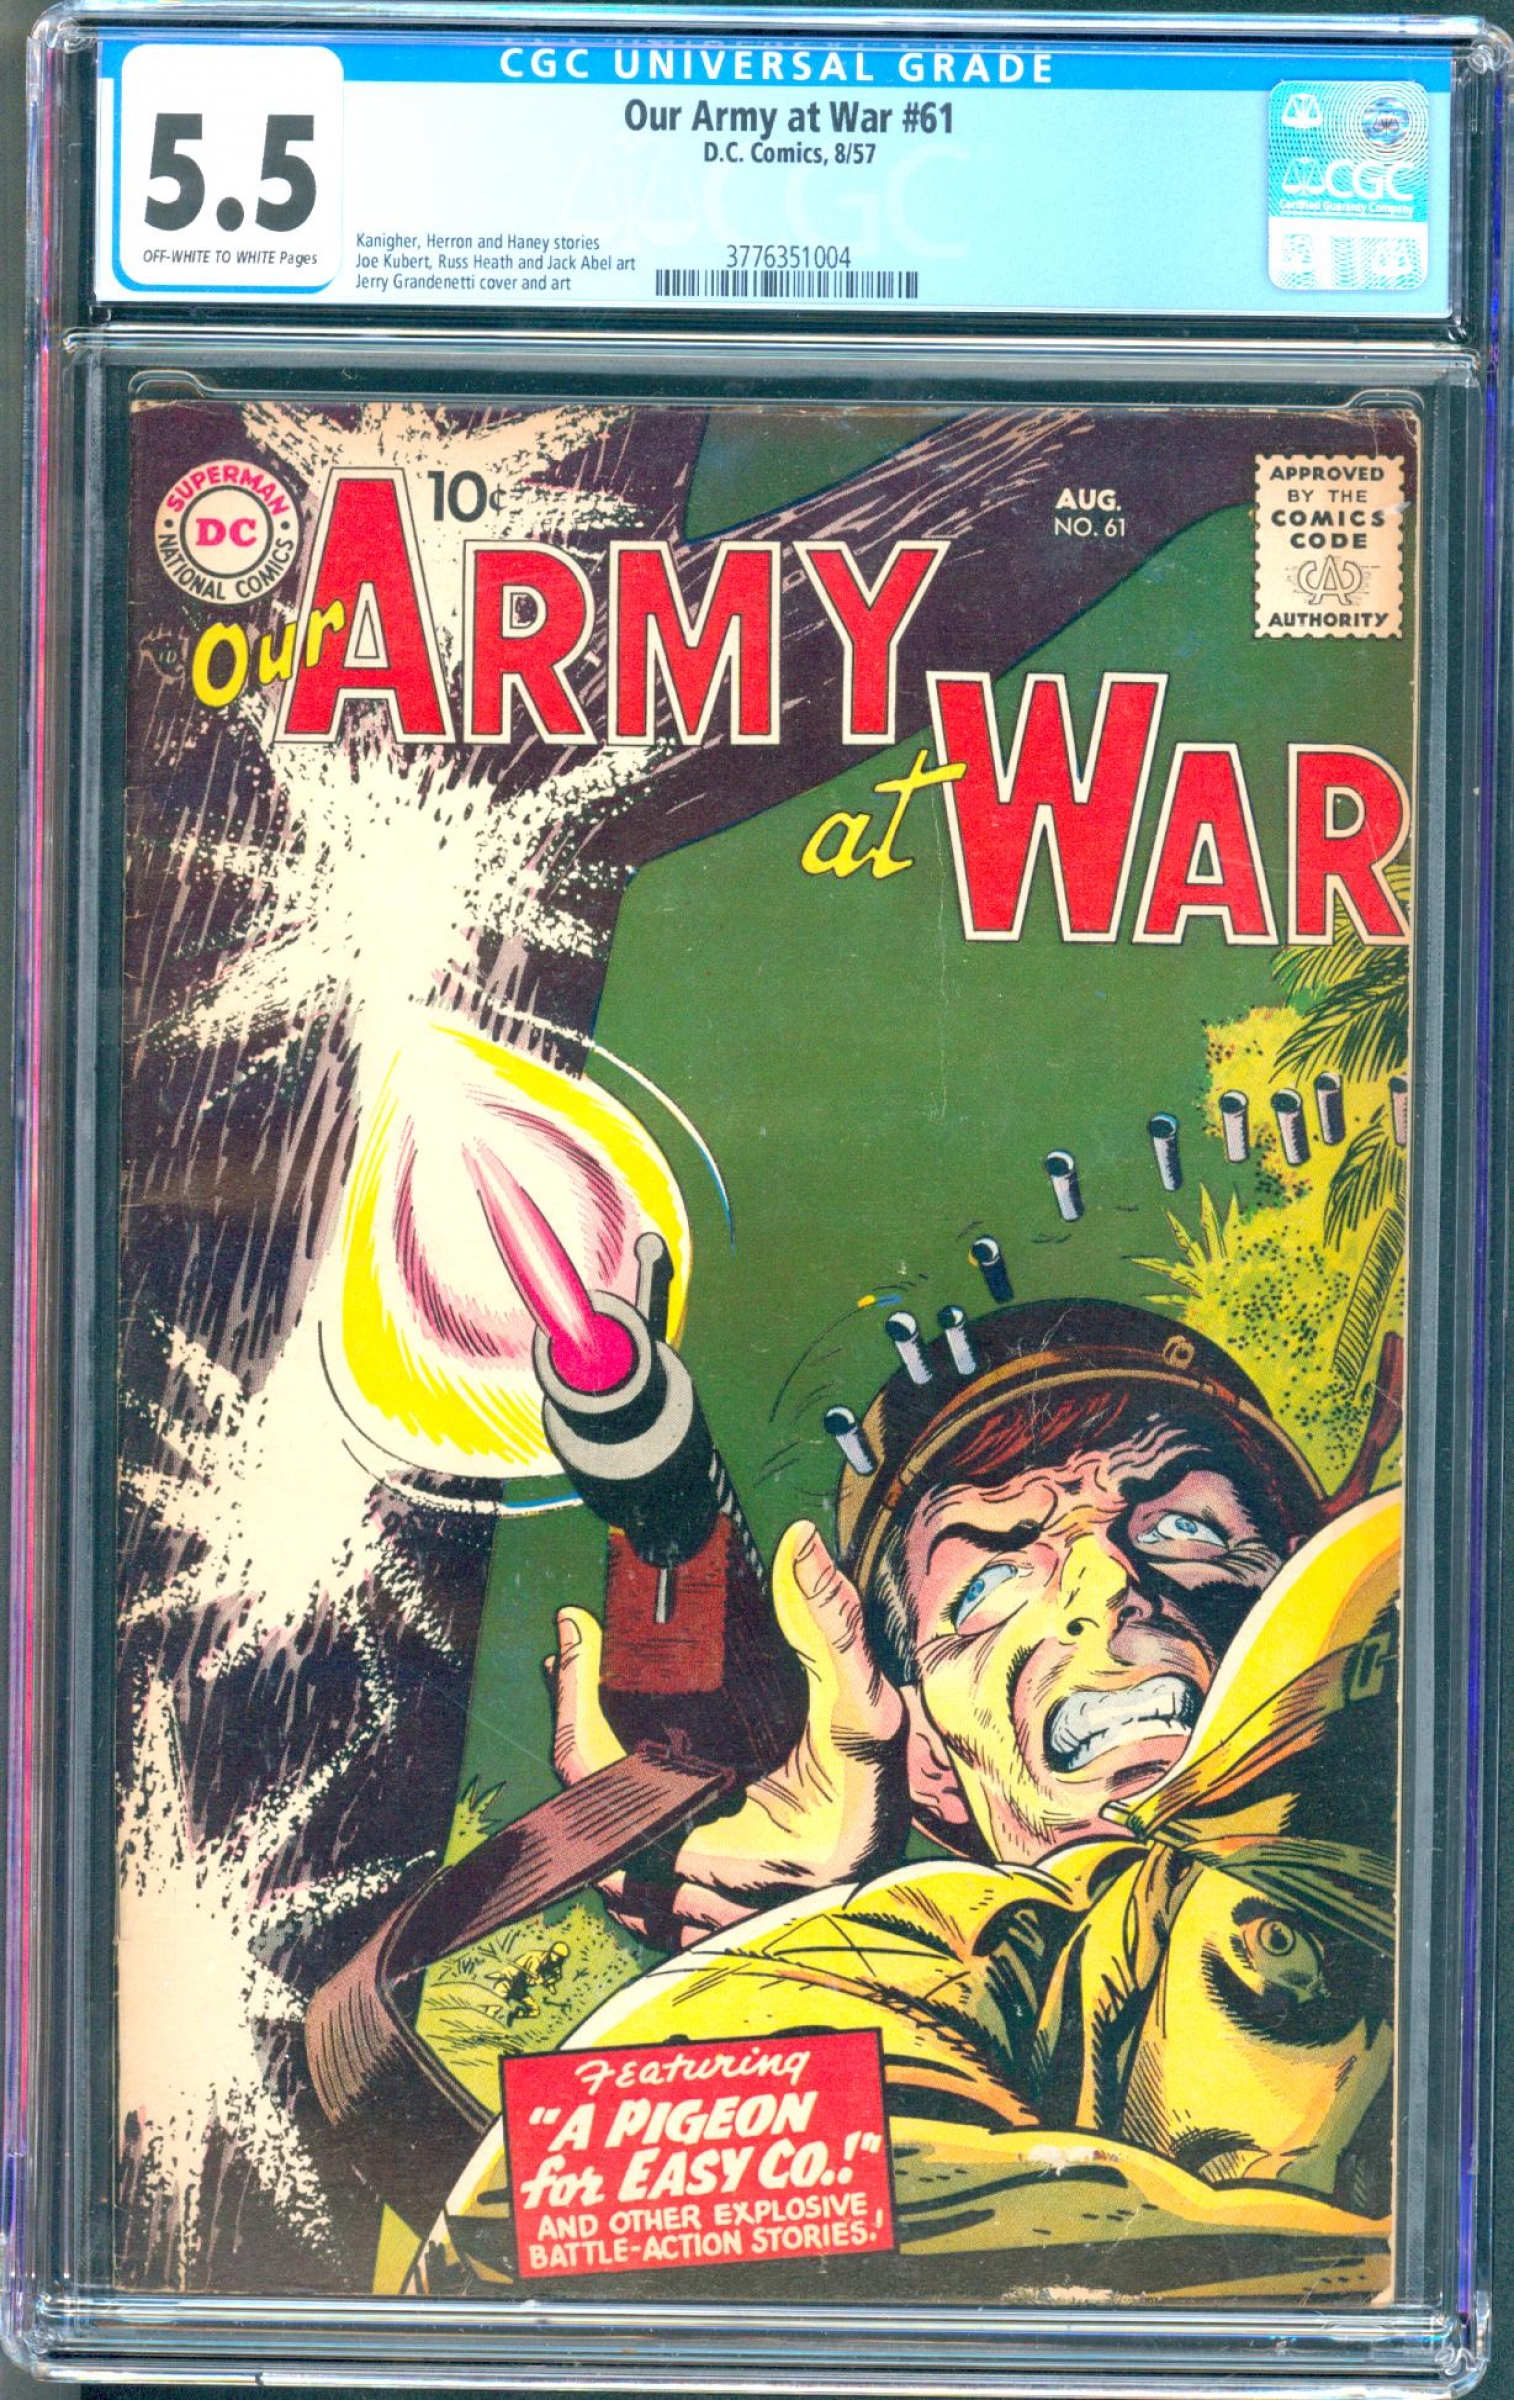 Our Army at War #61 CGC 5.5 ow/w